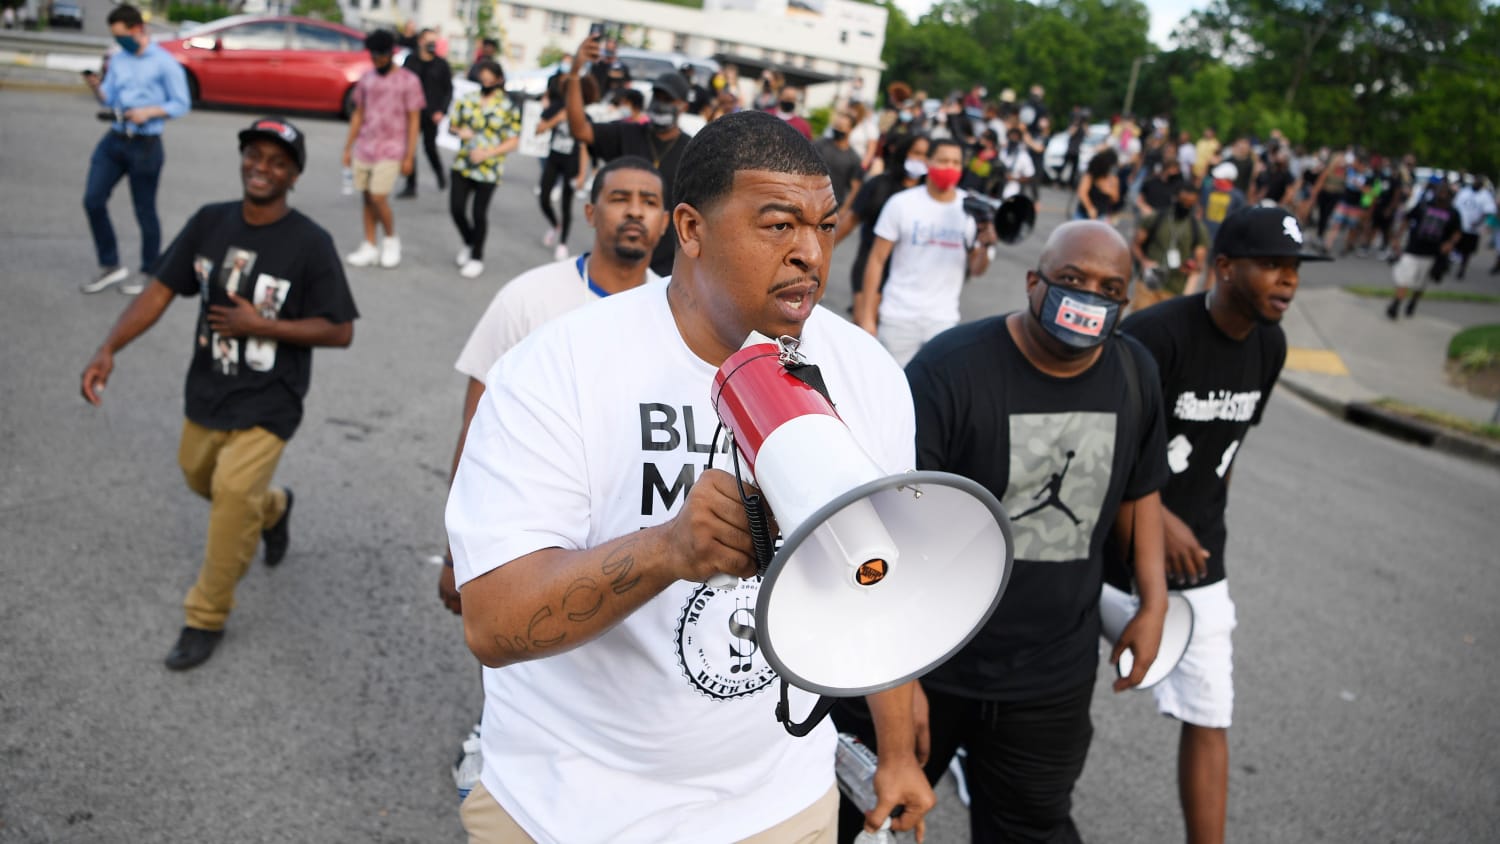 'Black music matters': Protesters march on Nashville's Music Row